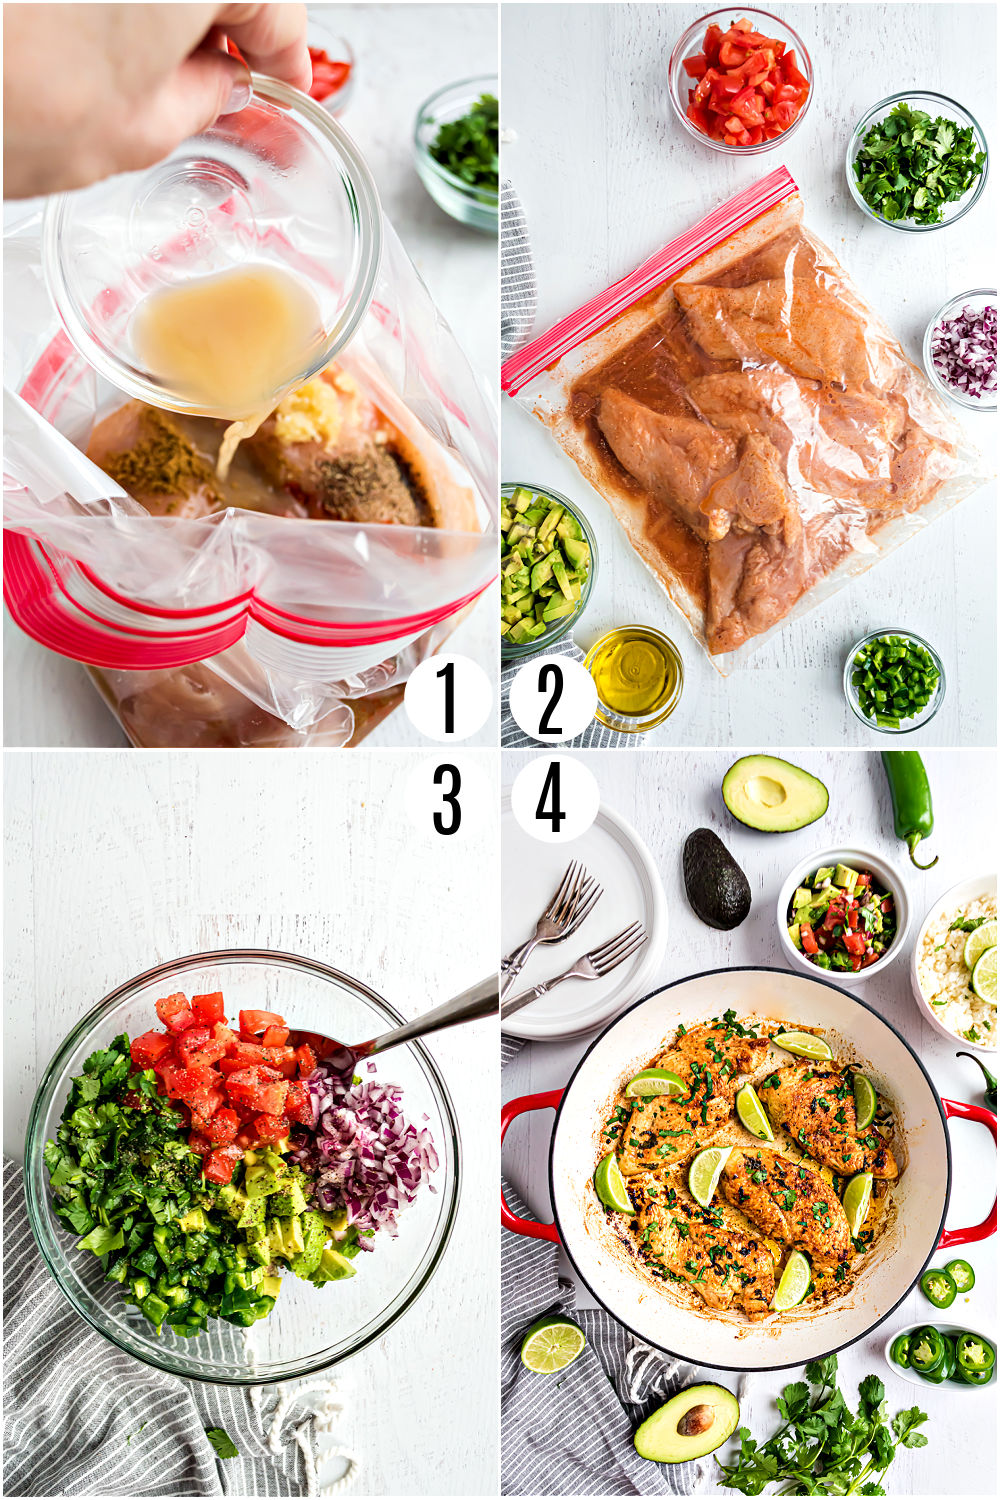 Step by step photos showing how to make cilantro lime chicken.